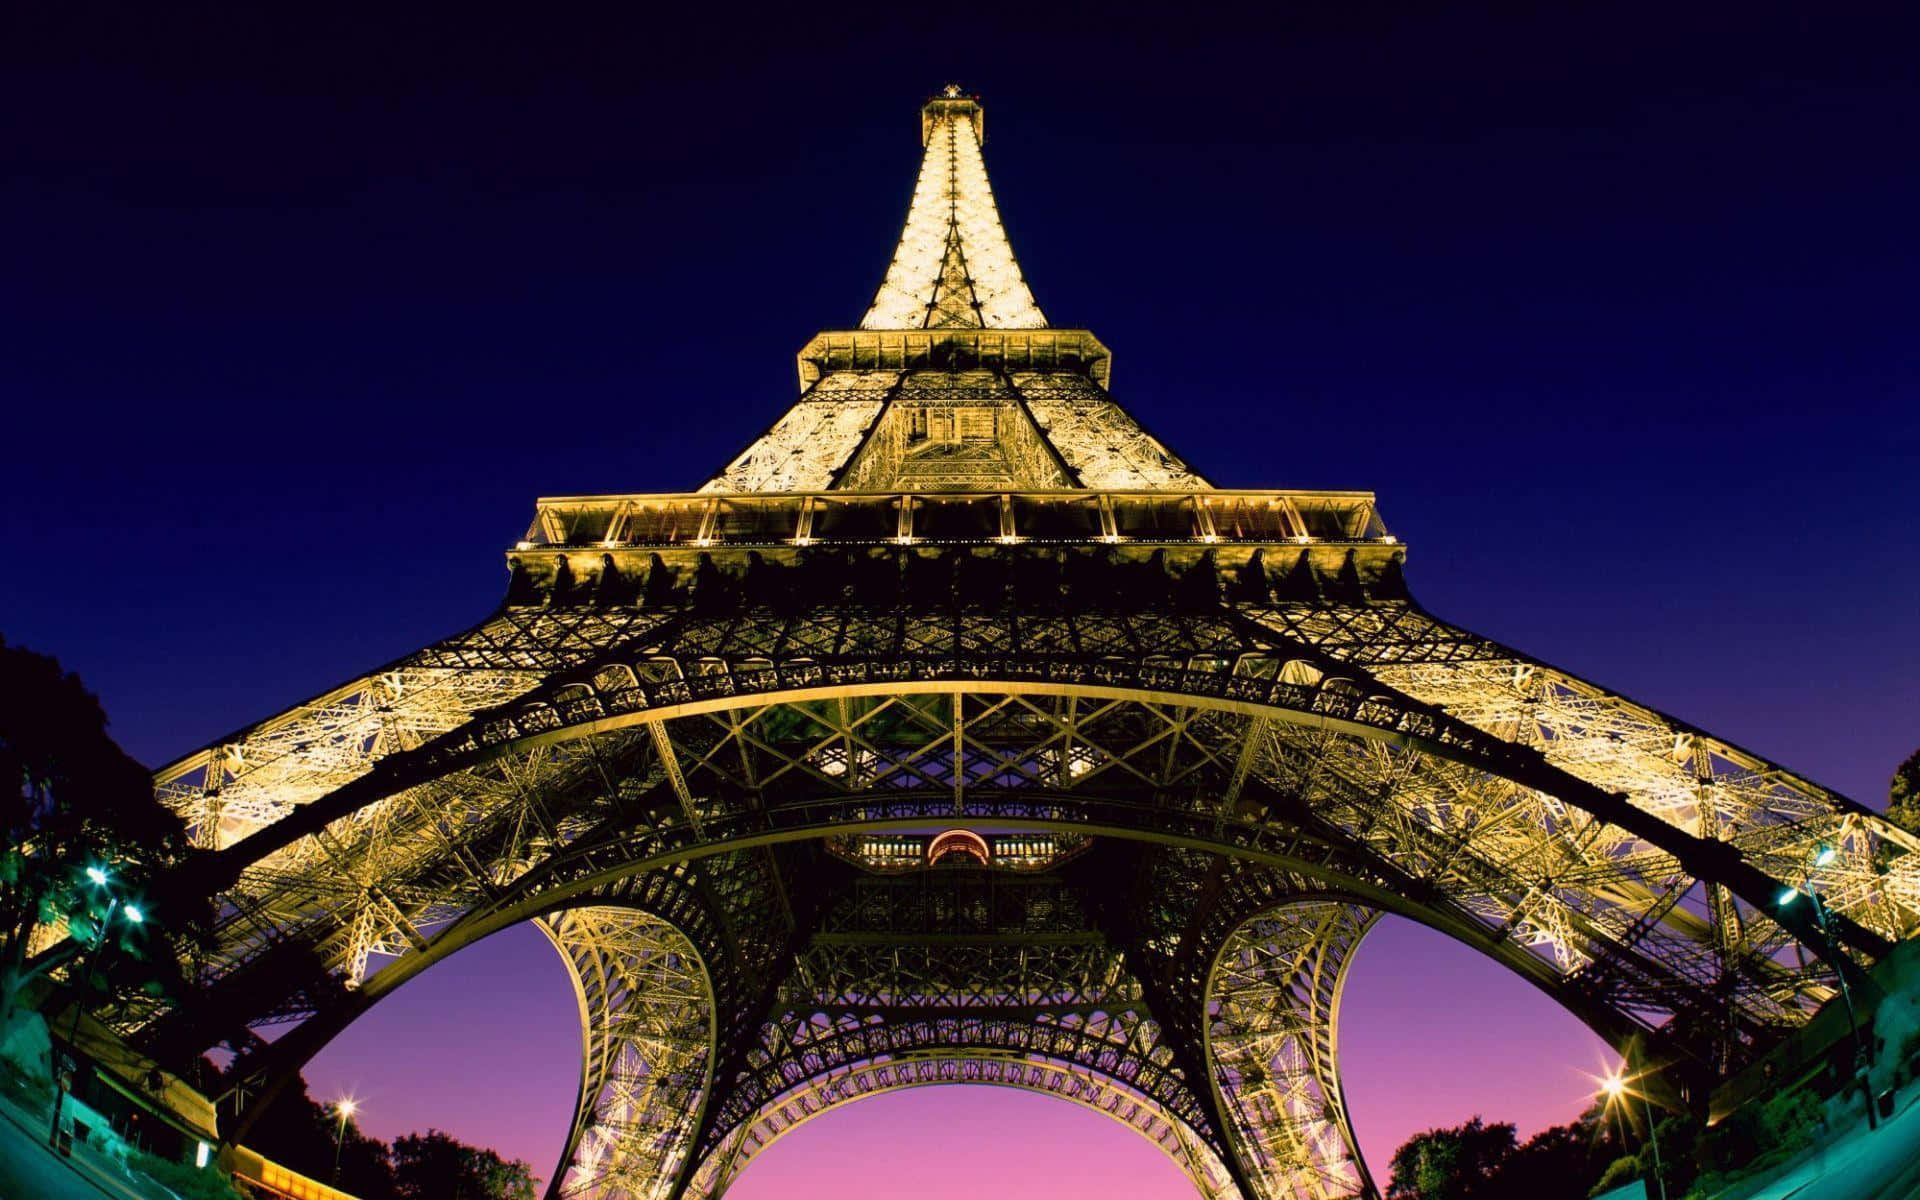 A picturesque view of the Paris skyline featuring the iconic Eiffel Tower.